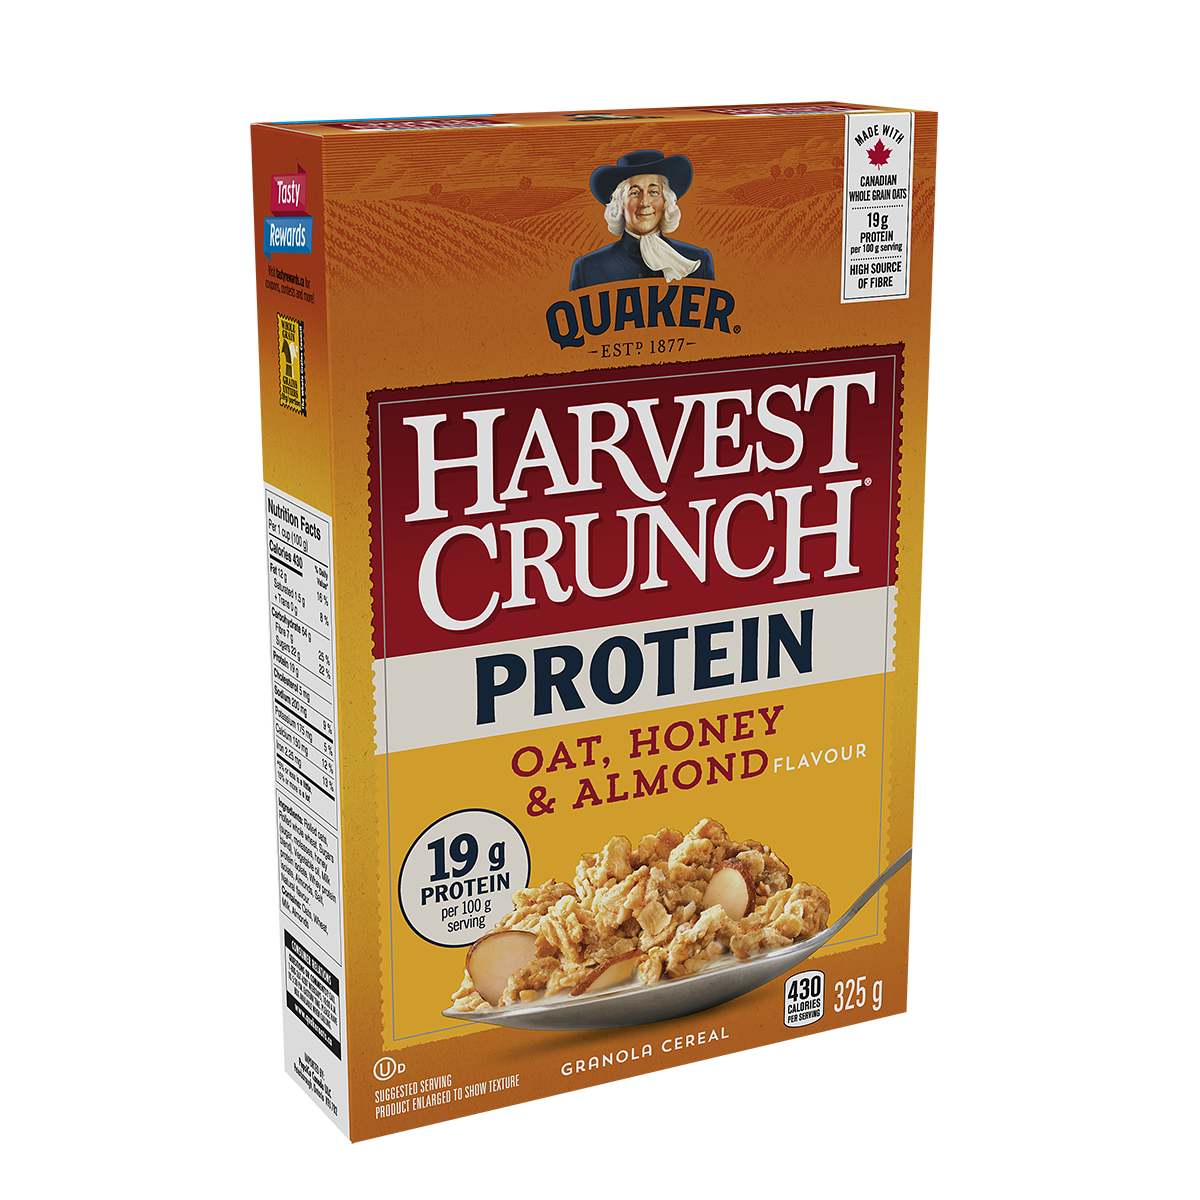 Quaker Harvest Crunch Protein Oat, Honey and Almond flavour Granola Cereal